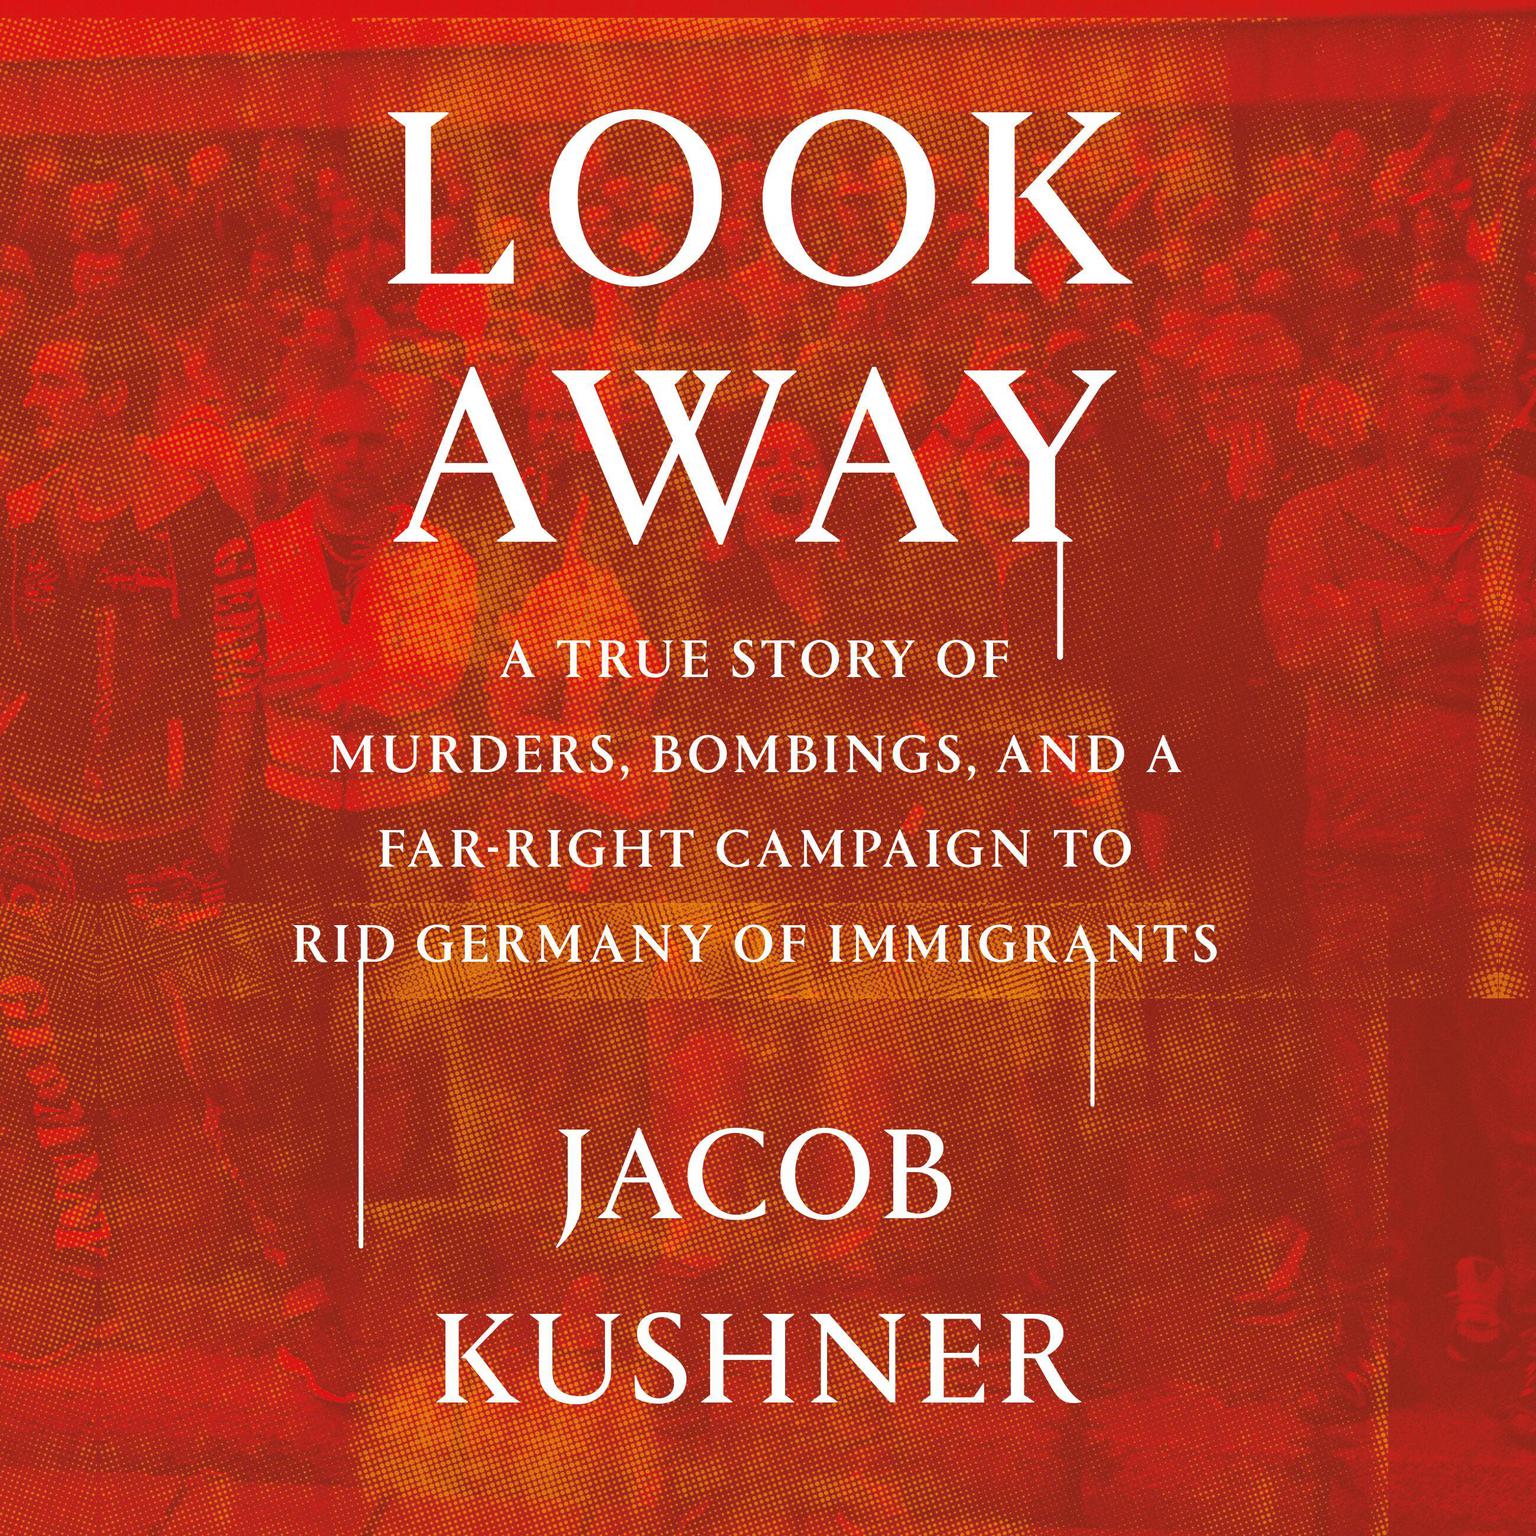 Look Away: A True Story of Murders, Bombings, and a Far-Right Campaign to Rid Germany of Immigrants Audiobook, by Jacob Kushner